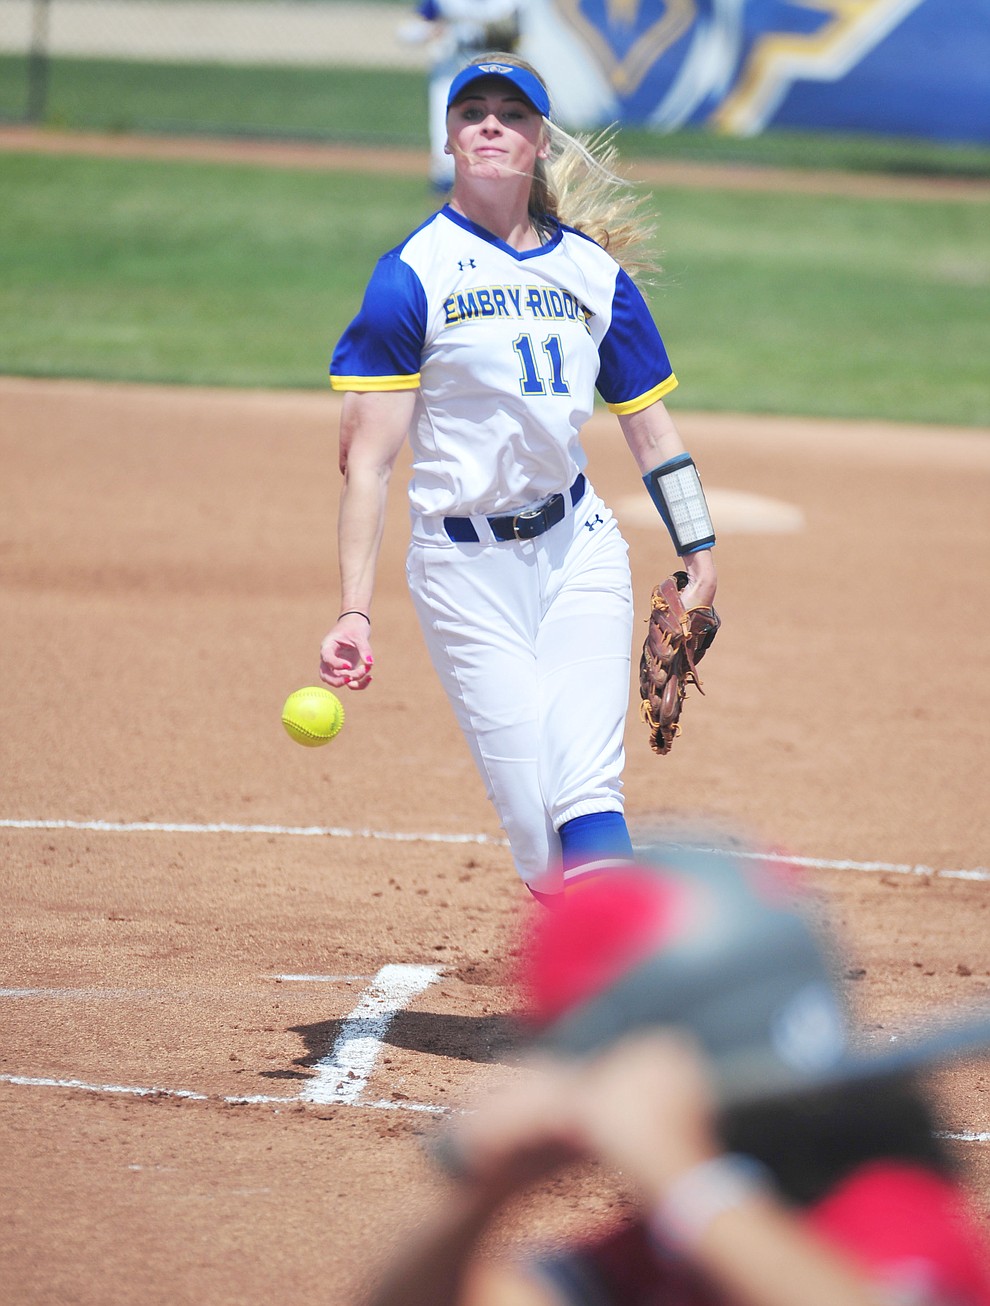 Embry Riddle's Mikaeli Davidson delivers a pitch as the Eagles take on the University of Antelope Valley Pioneer's for the first game of a softball doubleheader in Prescott Friday, April 5. The Eagles won the game 2-0. (Les Stukenberg/Courier)